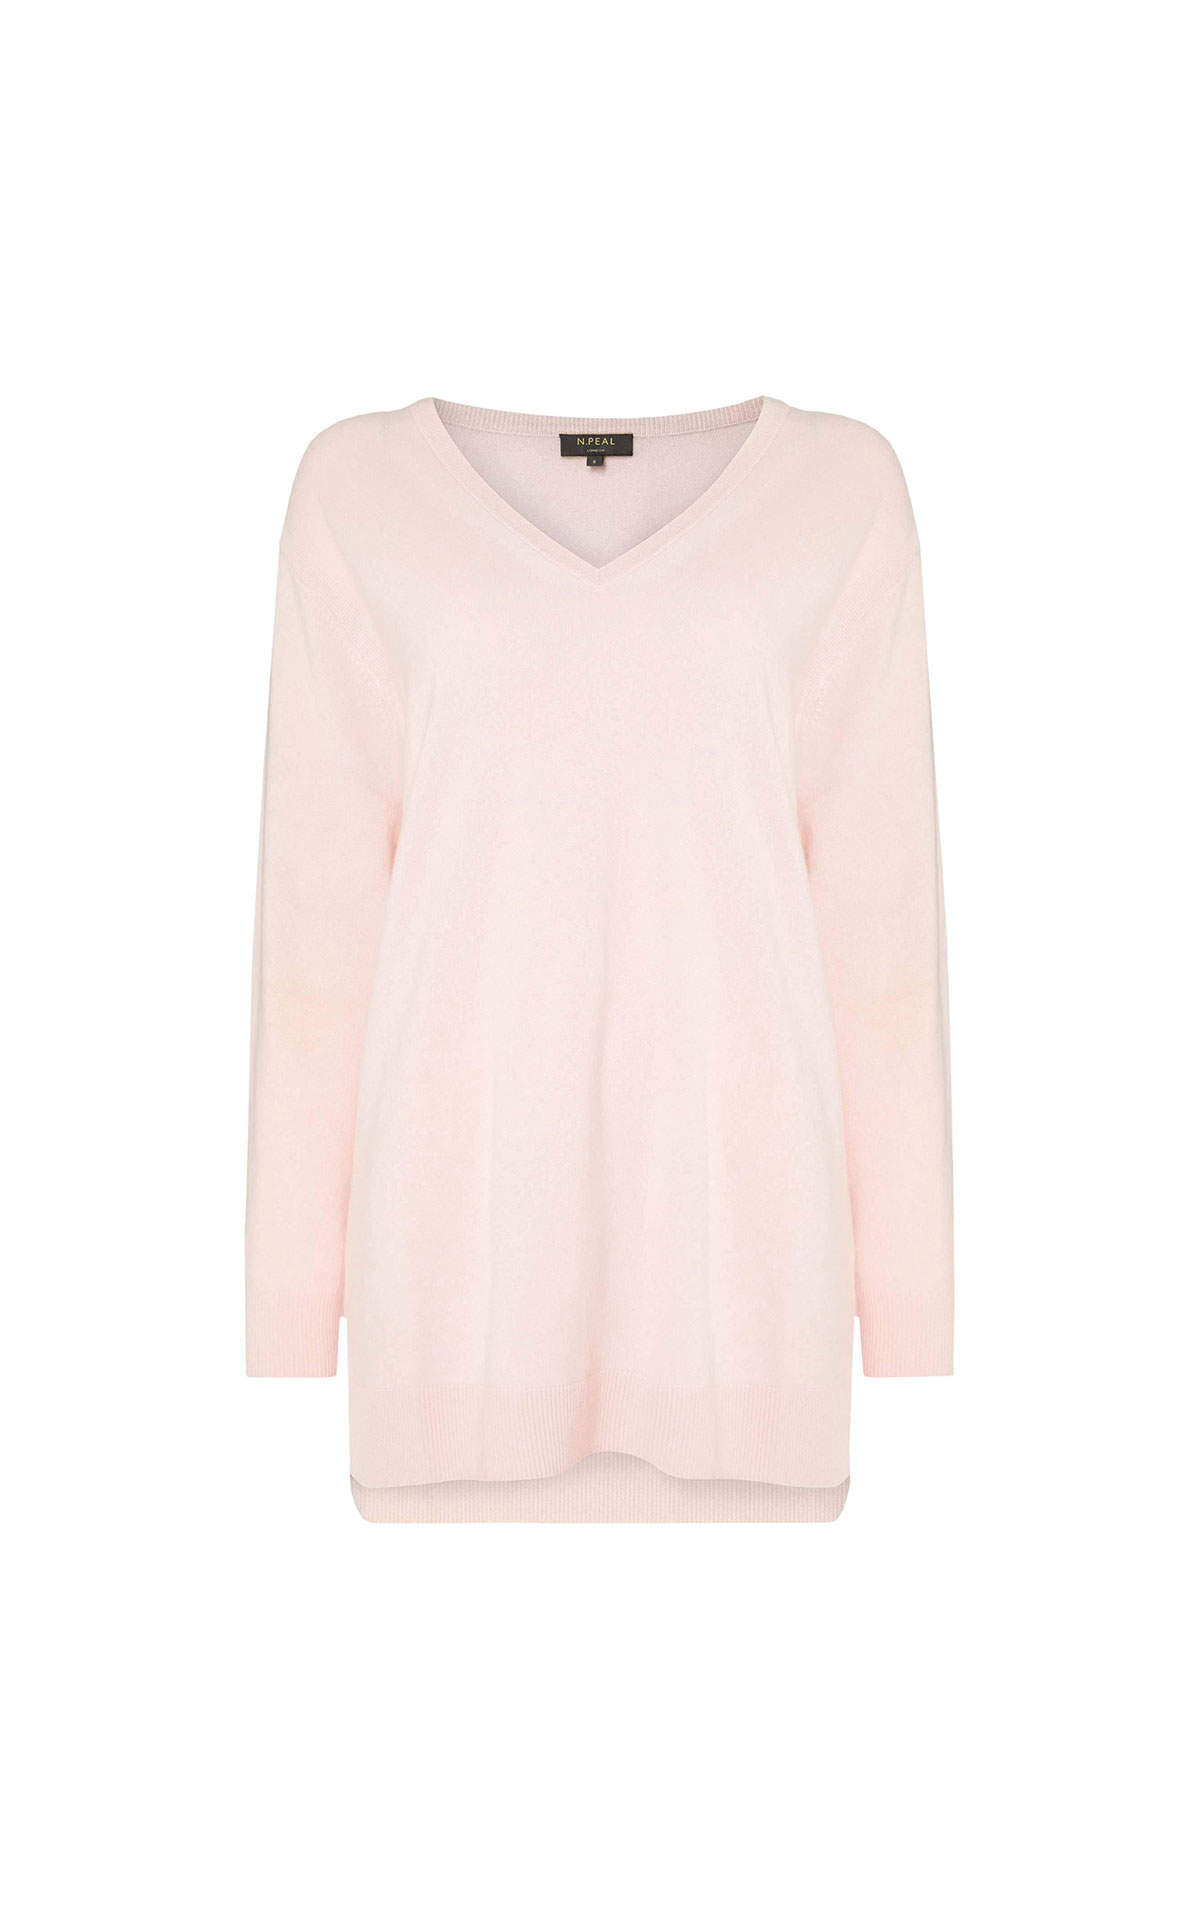 N.Peal Ladies v-neck longline sweater from Bicester Village